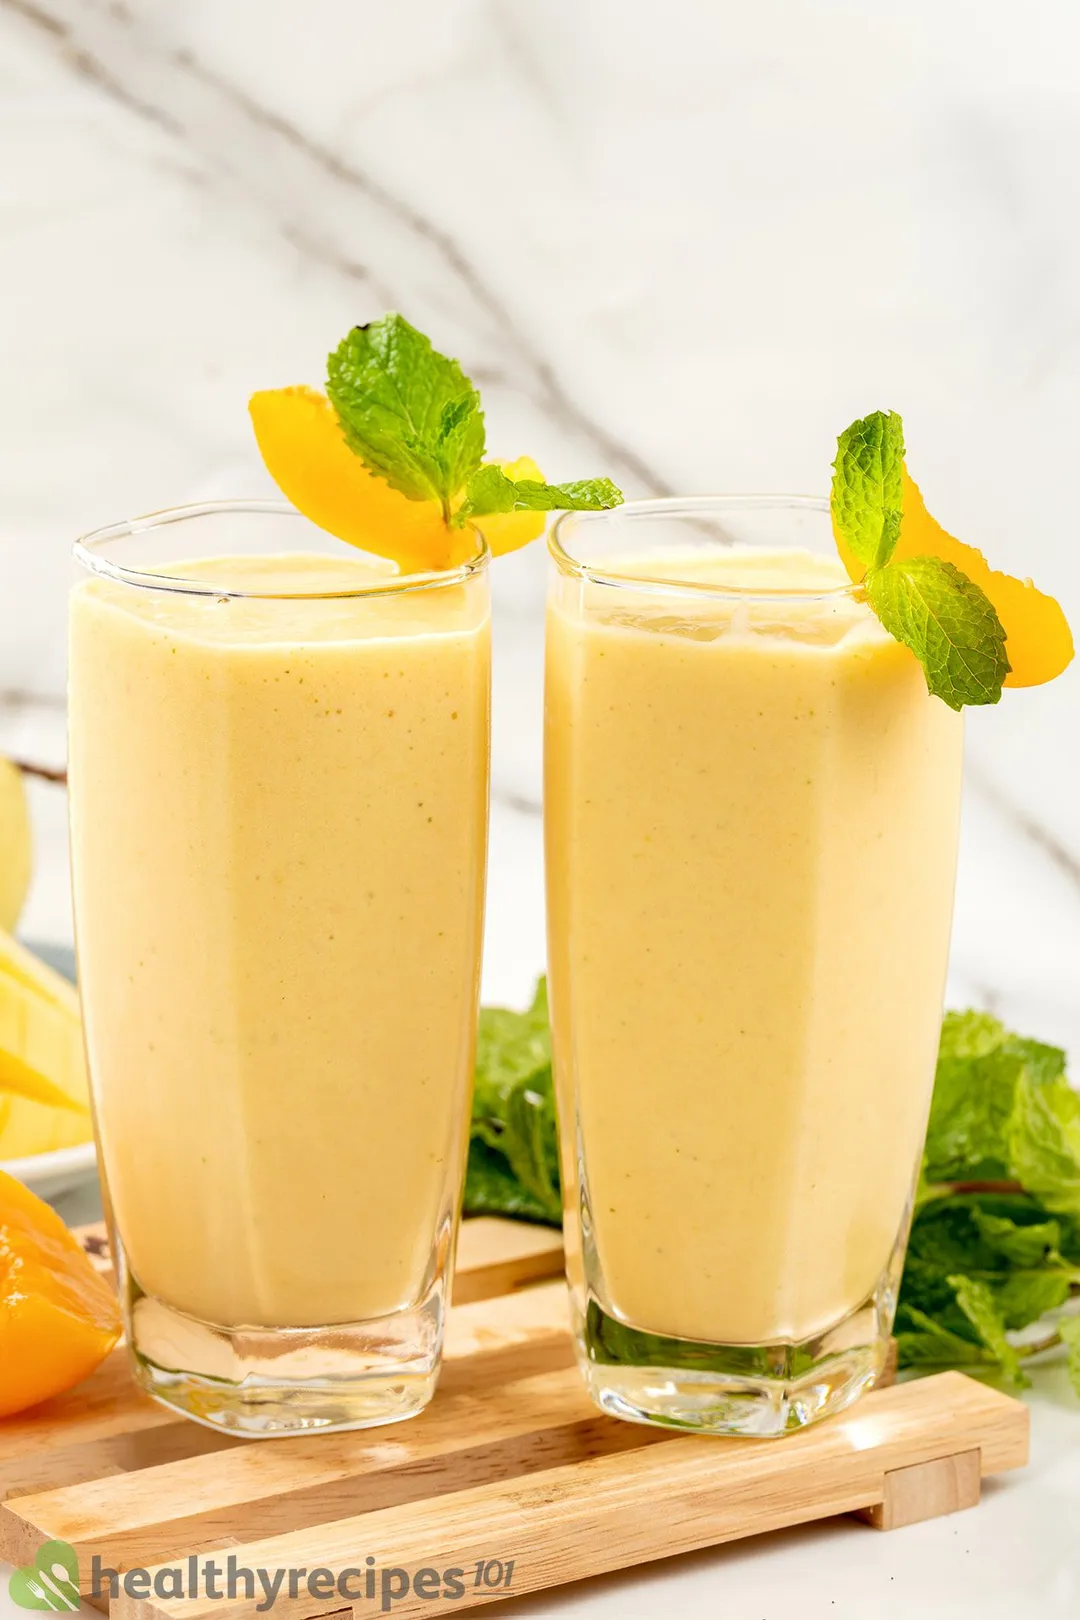 Two glasses of peach smoothie placed on a wooden board with some mint leaves and peach slices in the back.